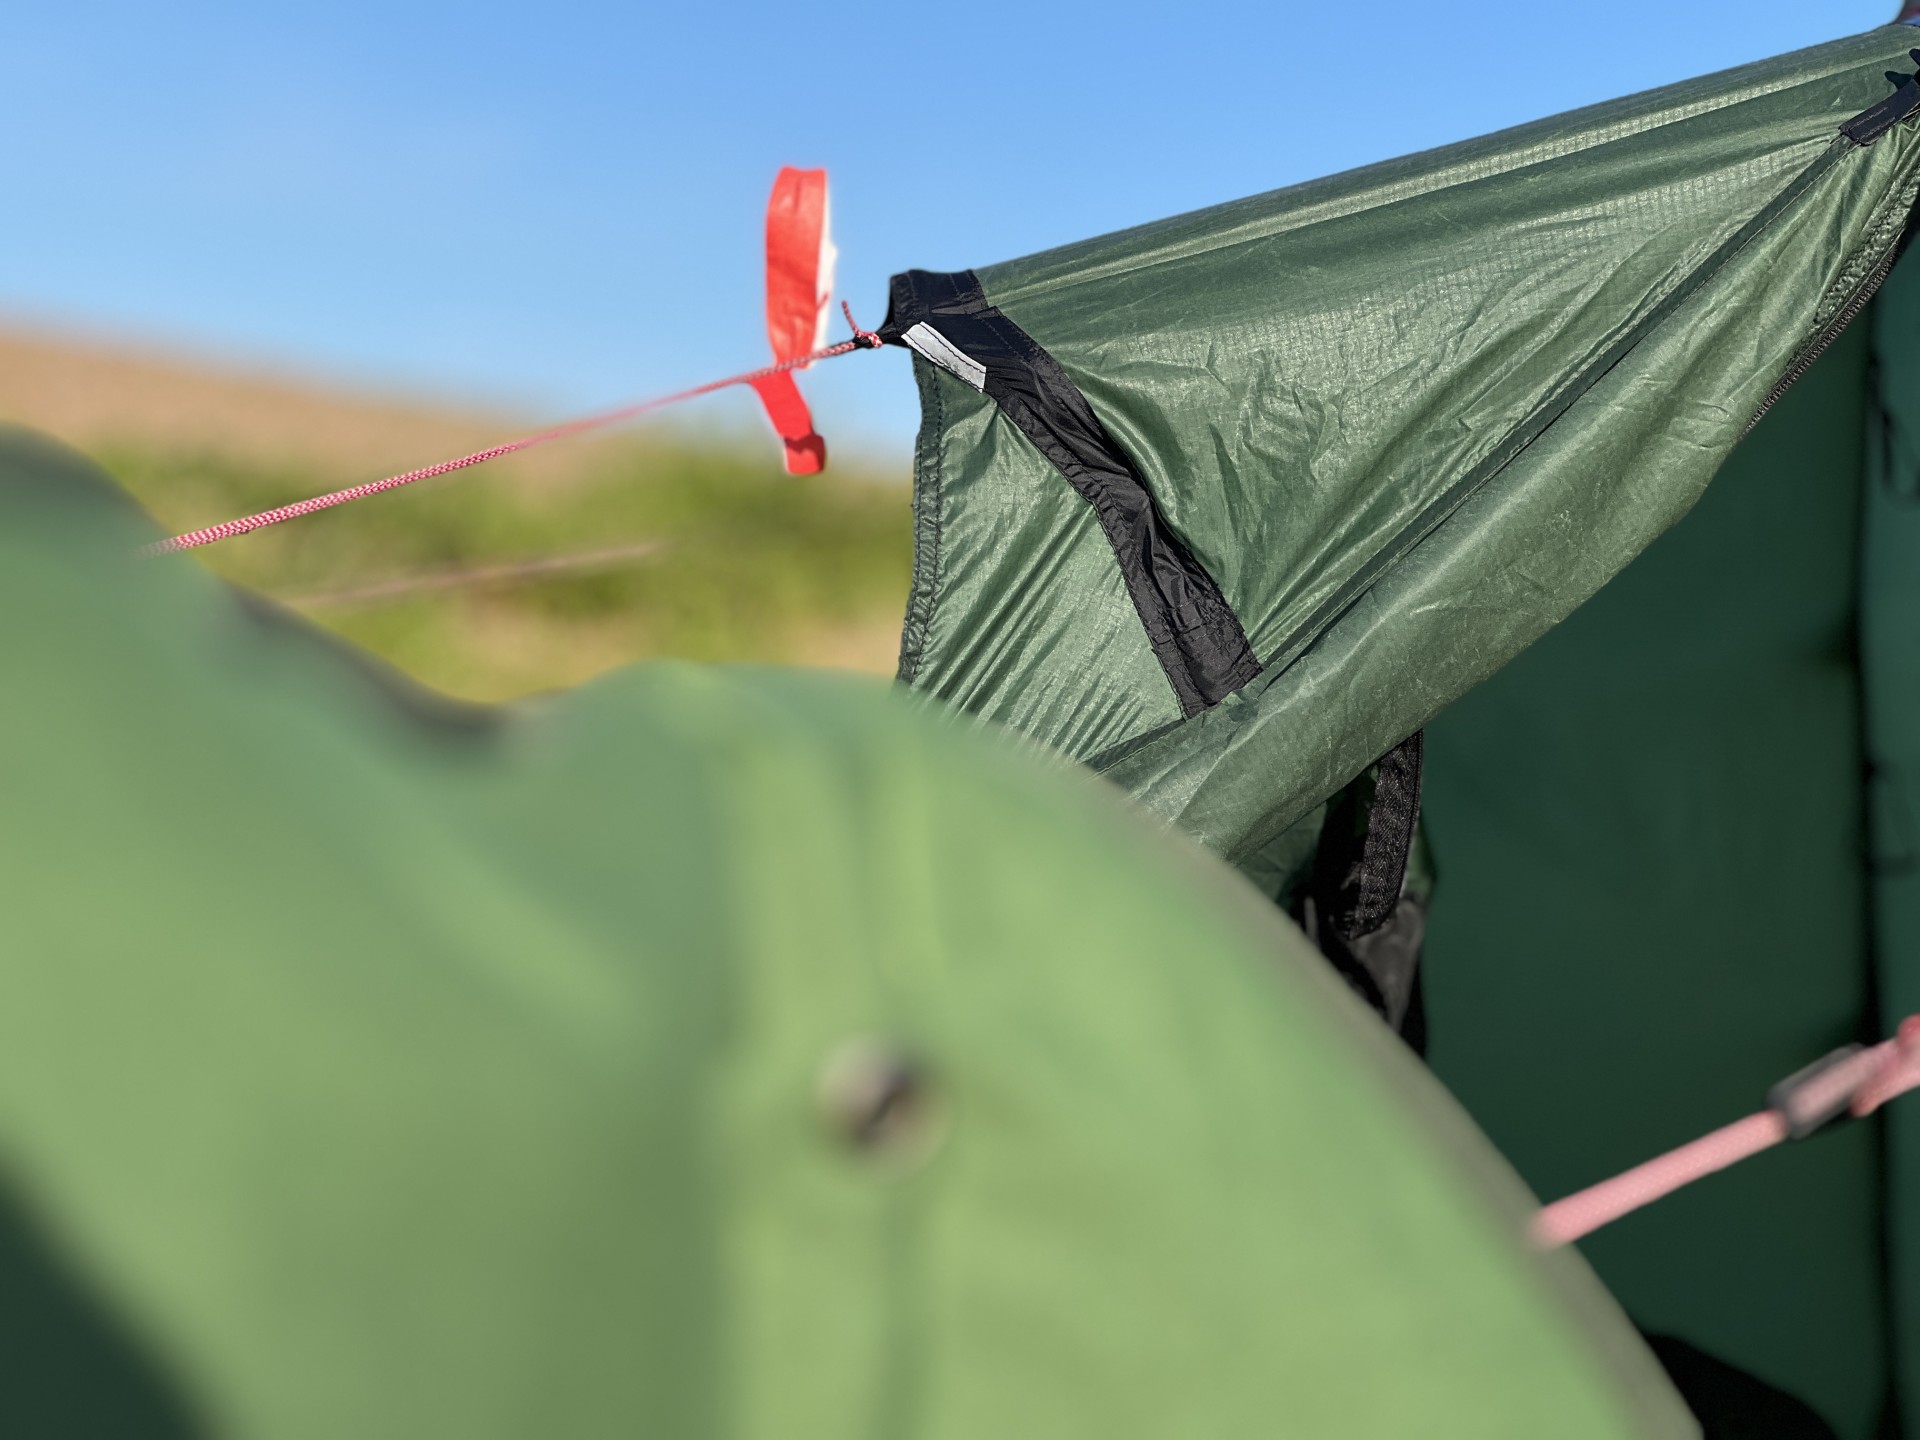 Hilleberg tents are excellent for beach wild camping in wind with NOMAD Sea Kayaking.